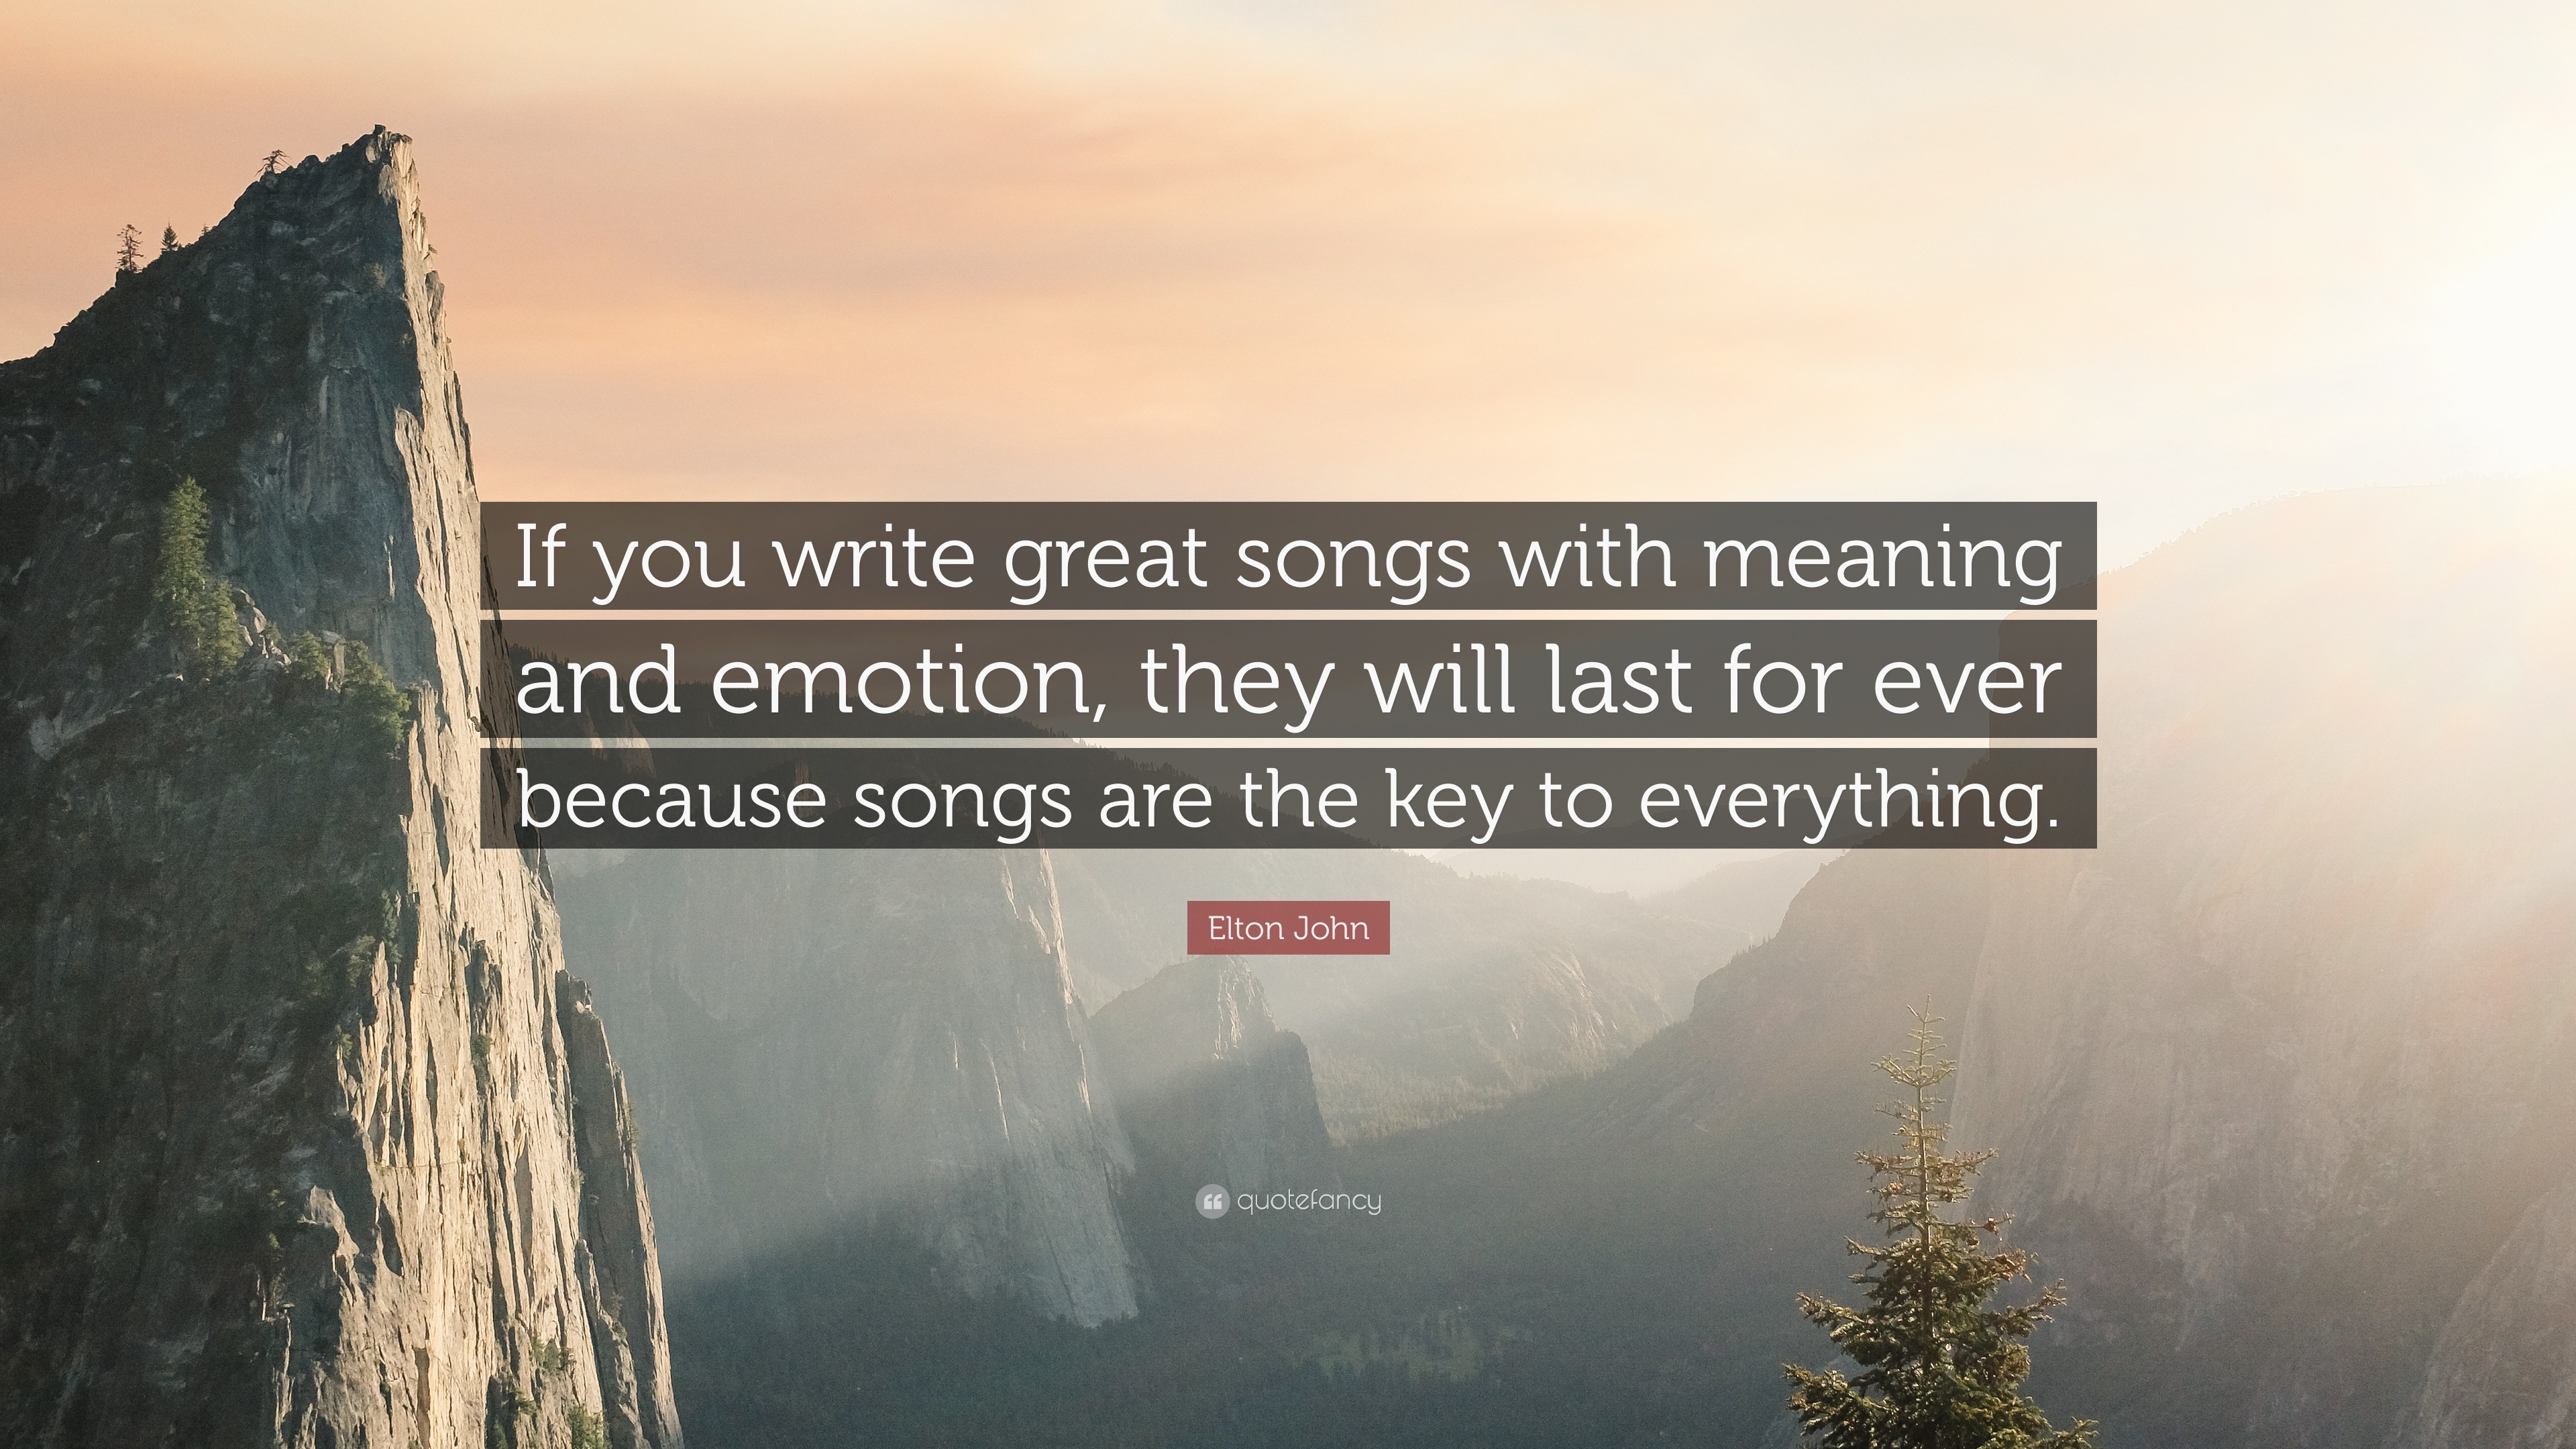 Elton John Quote “if You Write Great Songs With Meaning And Emotion They Will Last For Ever